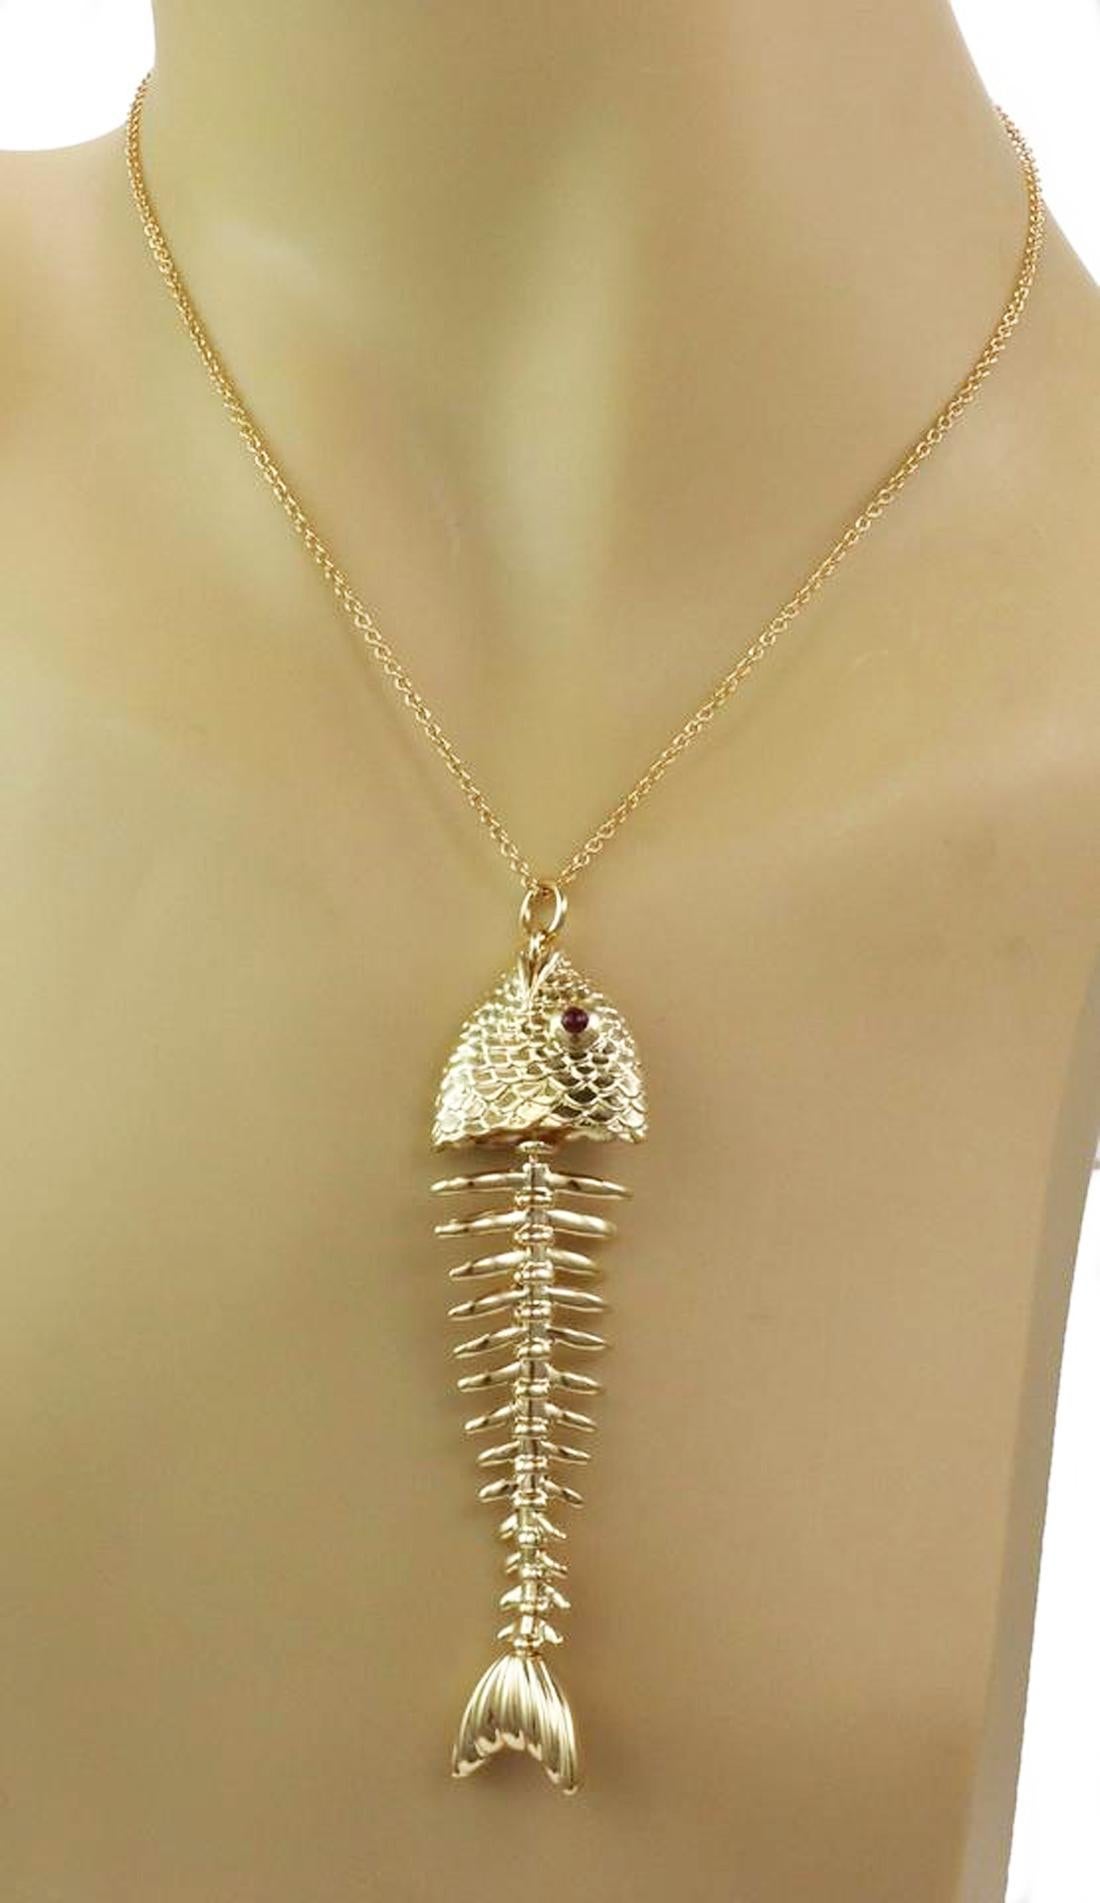 This rare authentic pendant and chain from Tiffany & Co. It is crafted from 18k yellow gold with a polished finish. The pendant features a large fish deboned with its scaled head attached to the bone and has cabochon ruby eyes. the tail is also